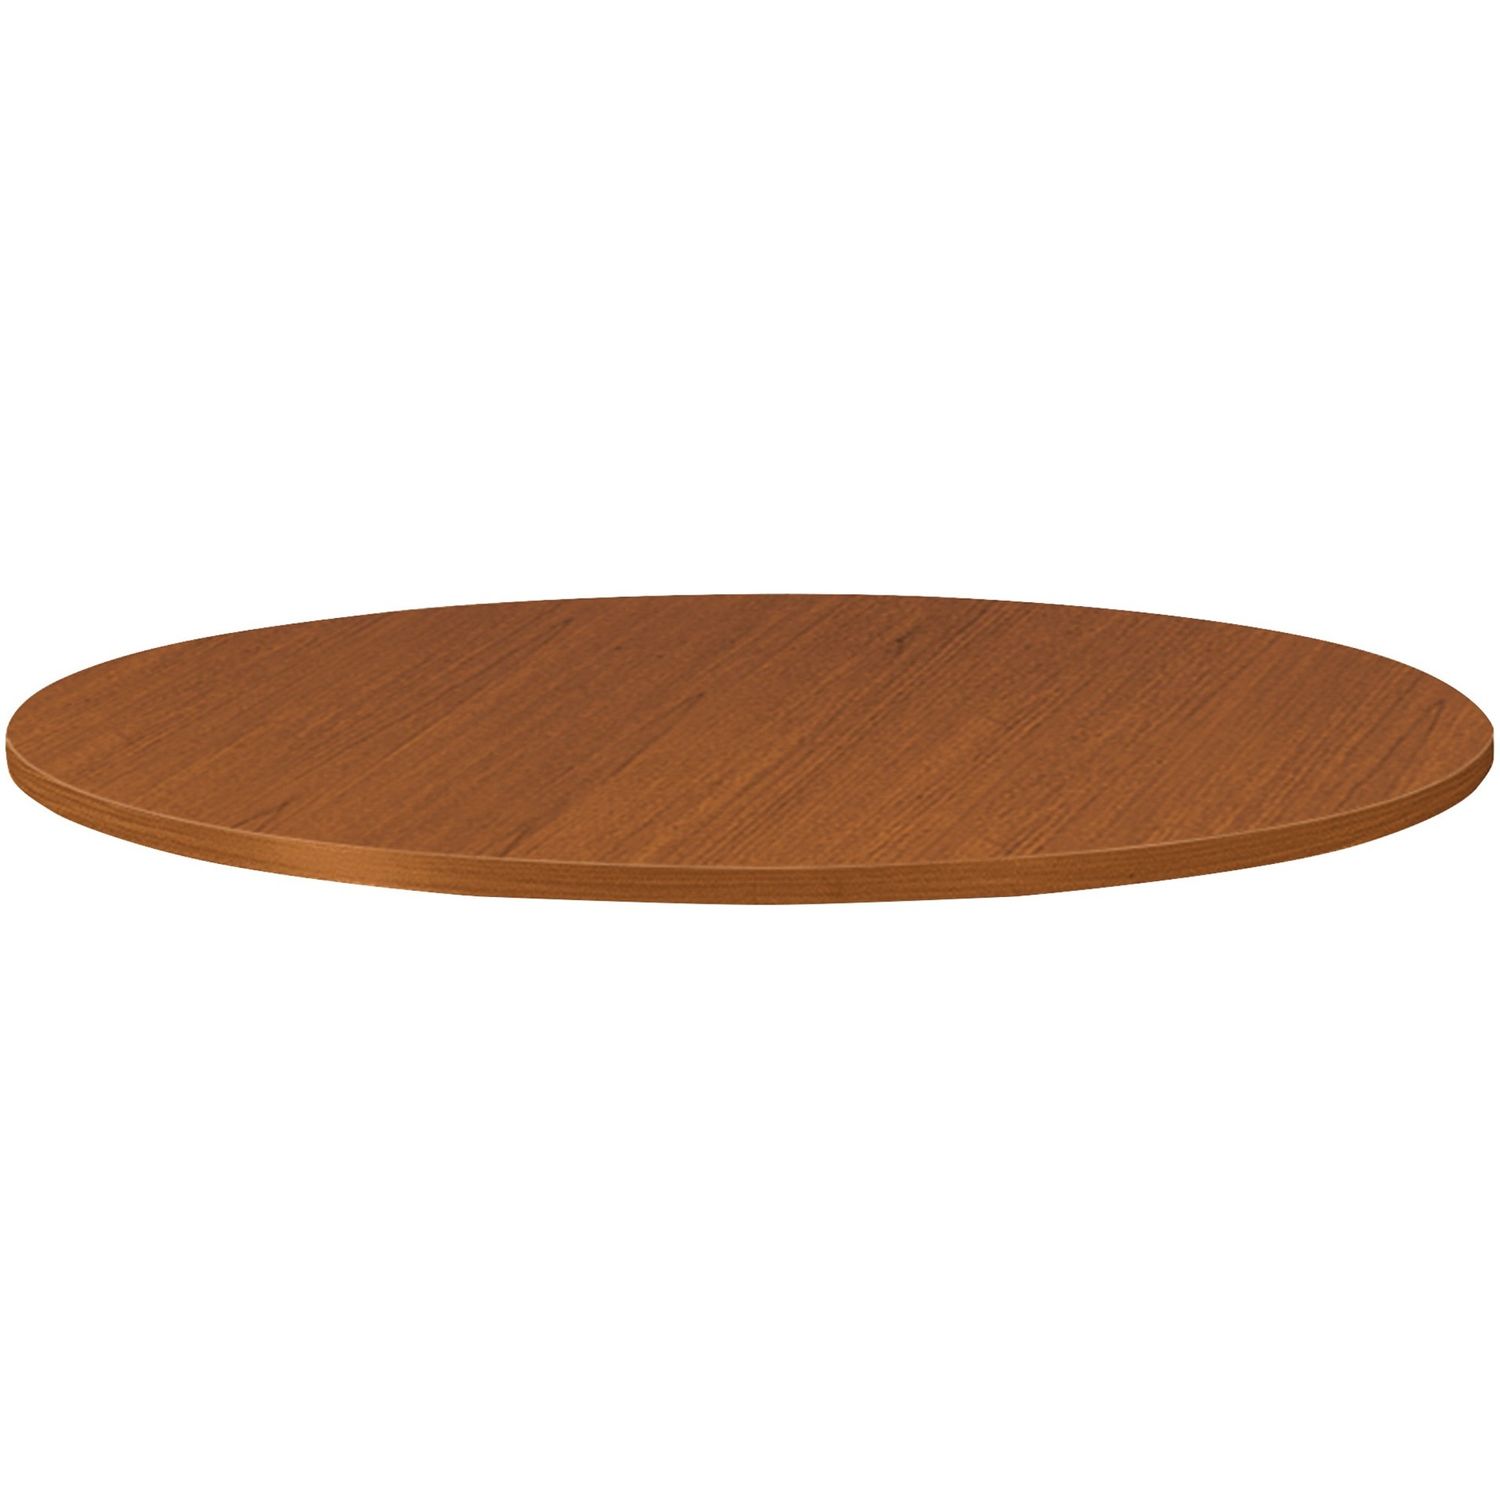 Preside Round Table Top 36", Bourbon Cherry Round, Laminated Top x 36" Table Top Diameter, Particleboard